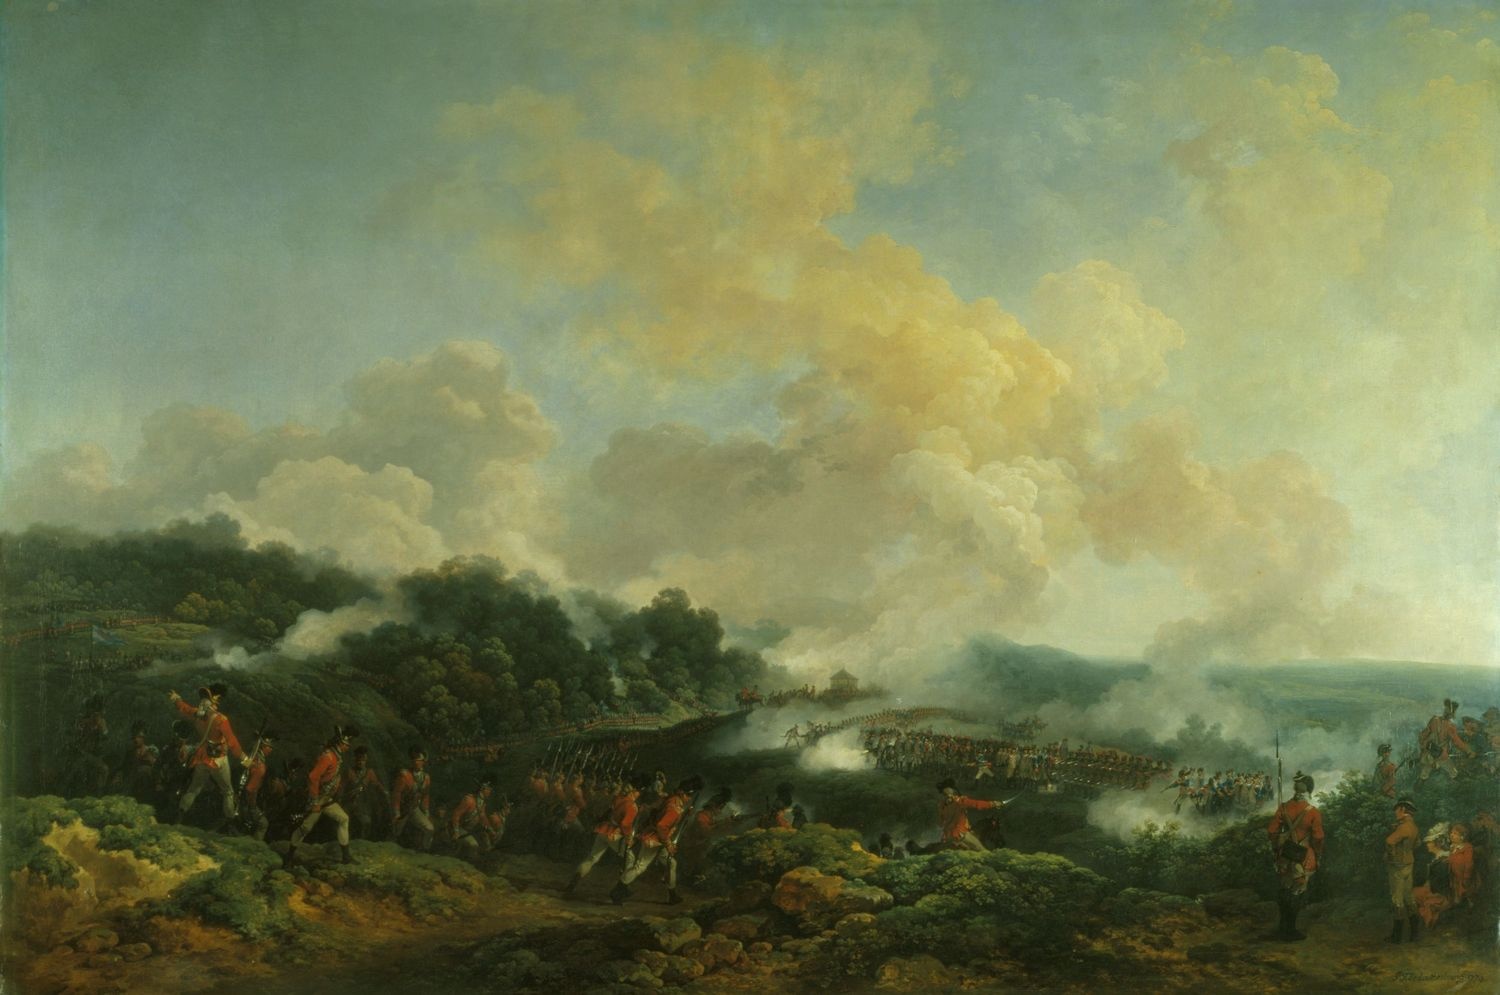 Depiction of a military exercise led by Lieutenant General Pierson and witnessed by George III, 1779, Philip James de Loutherbourg